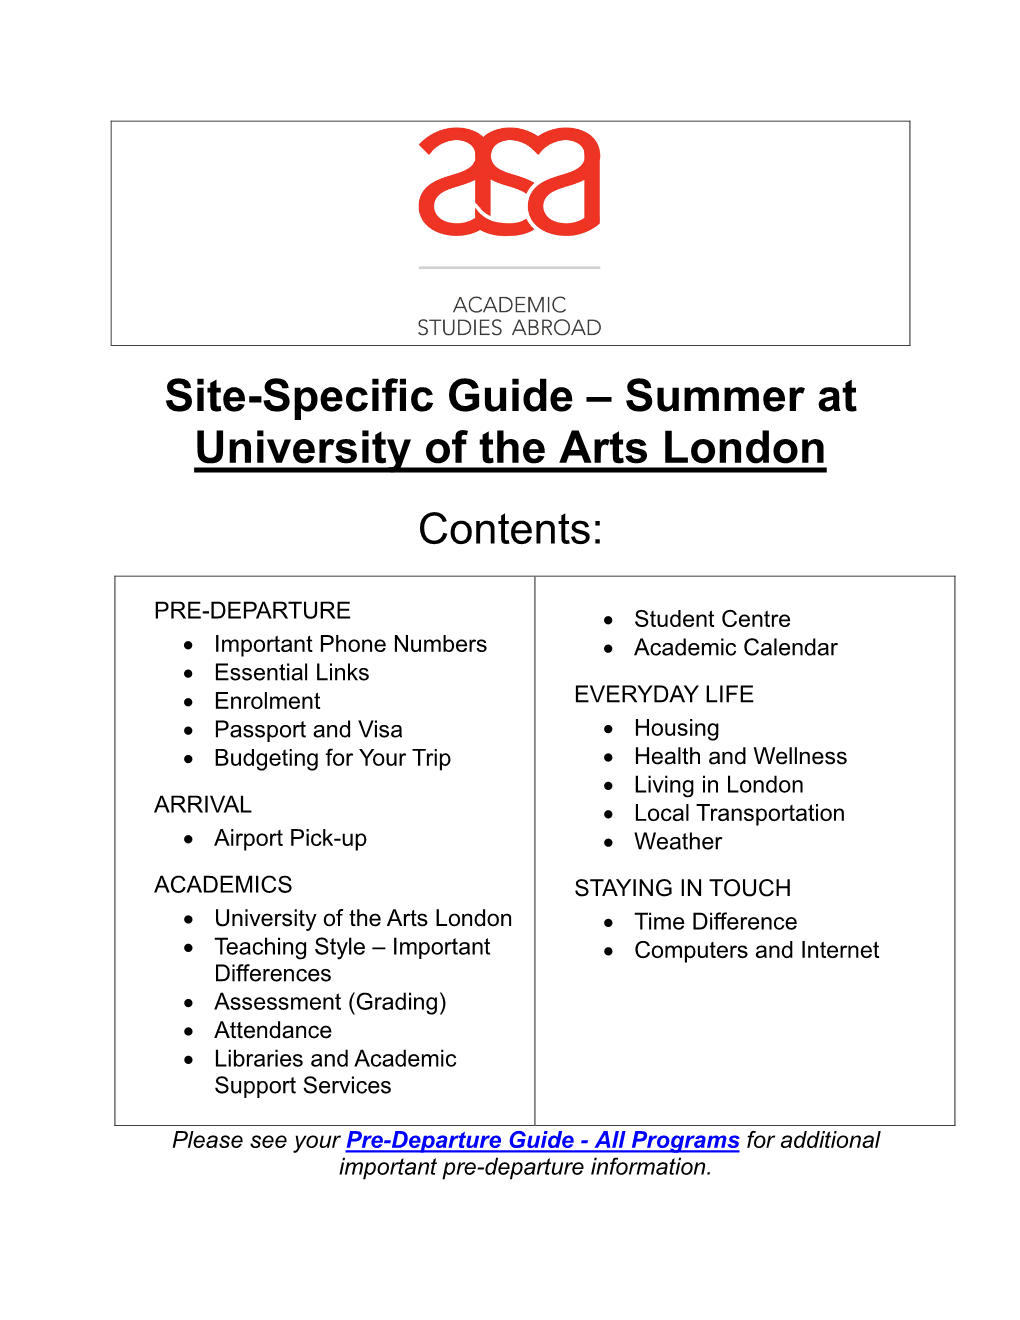 Site-Specific Guide – Summer at University of the Arts London